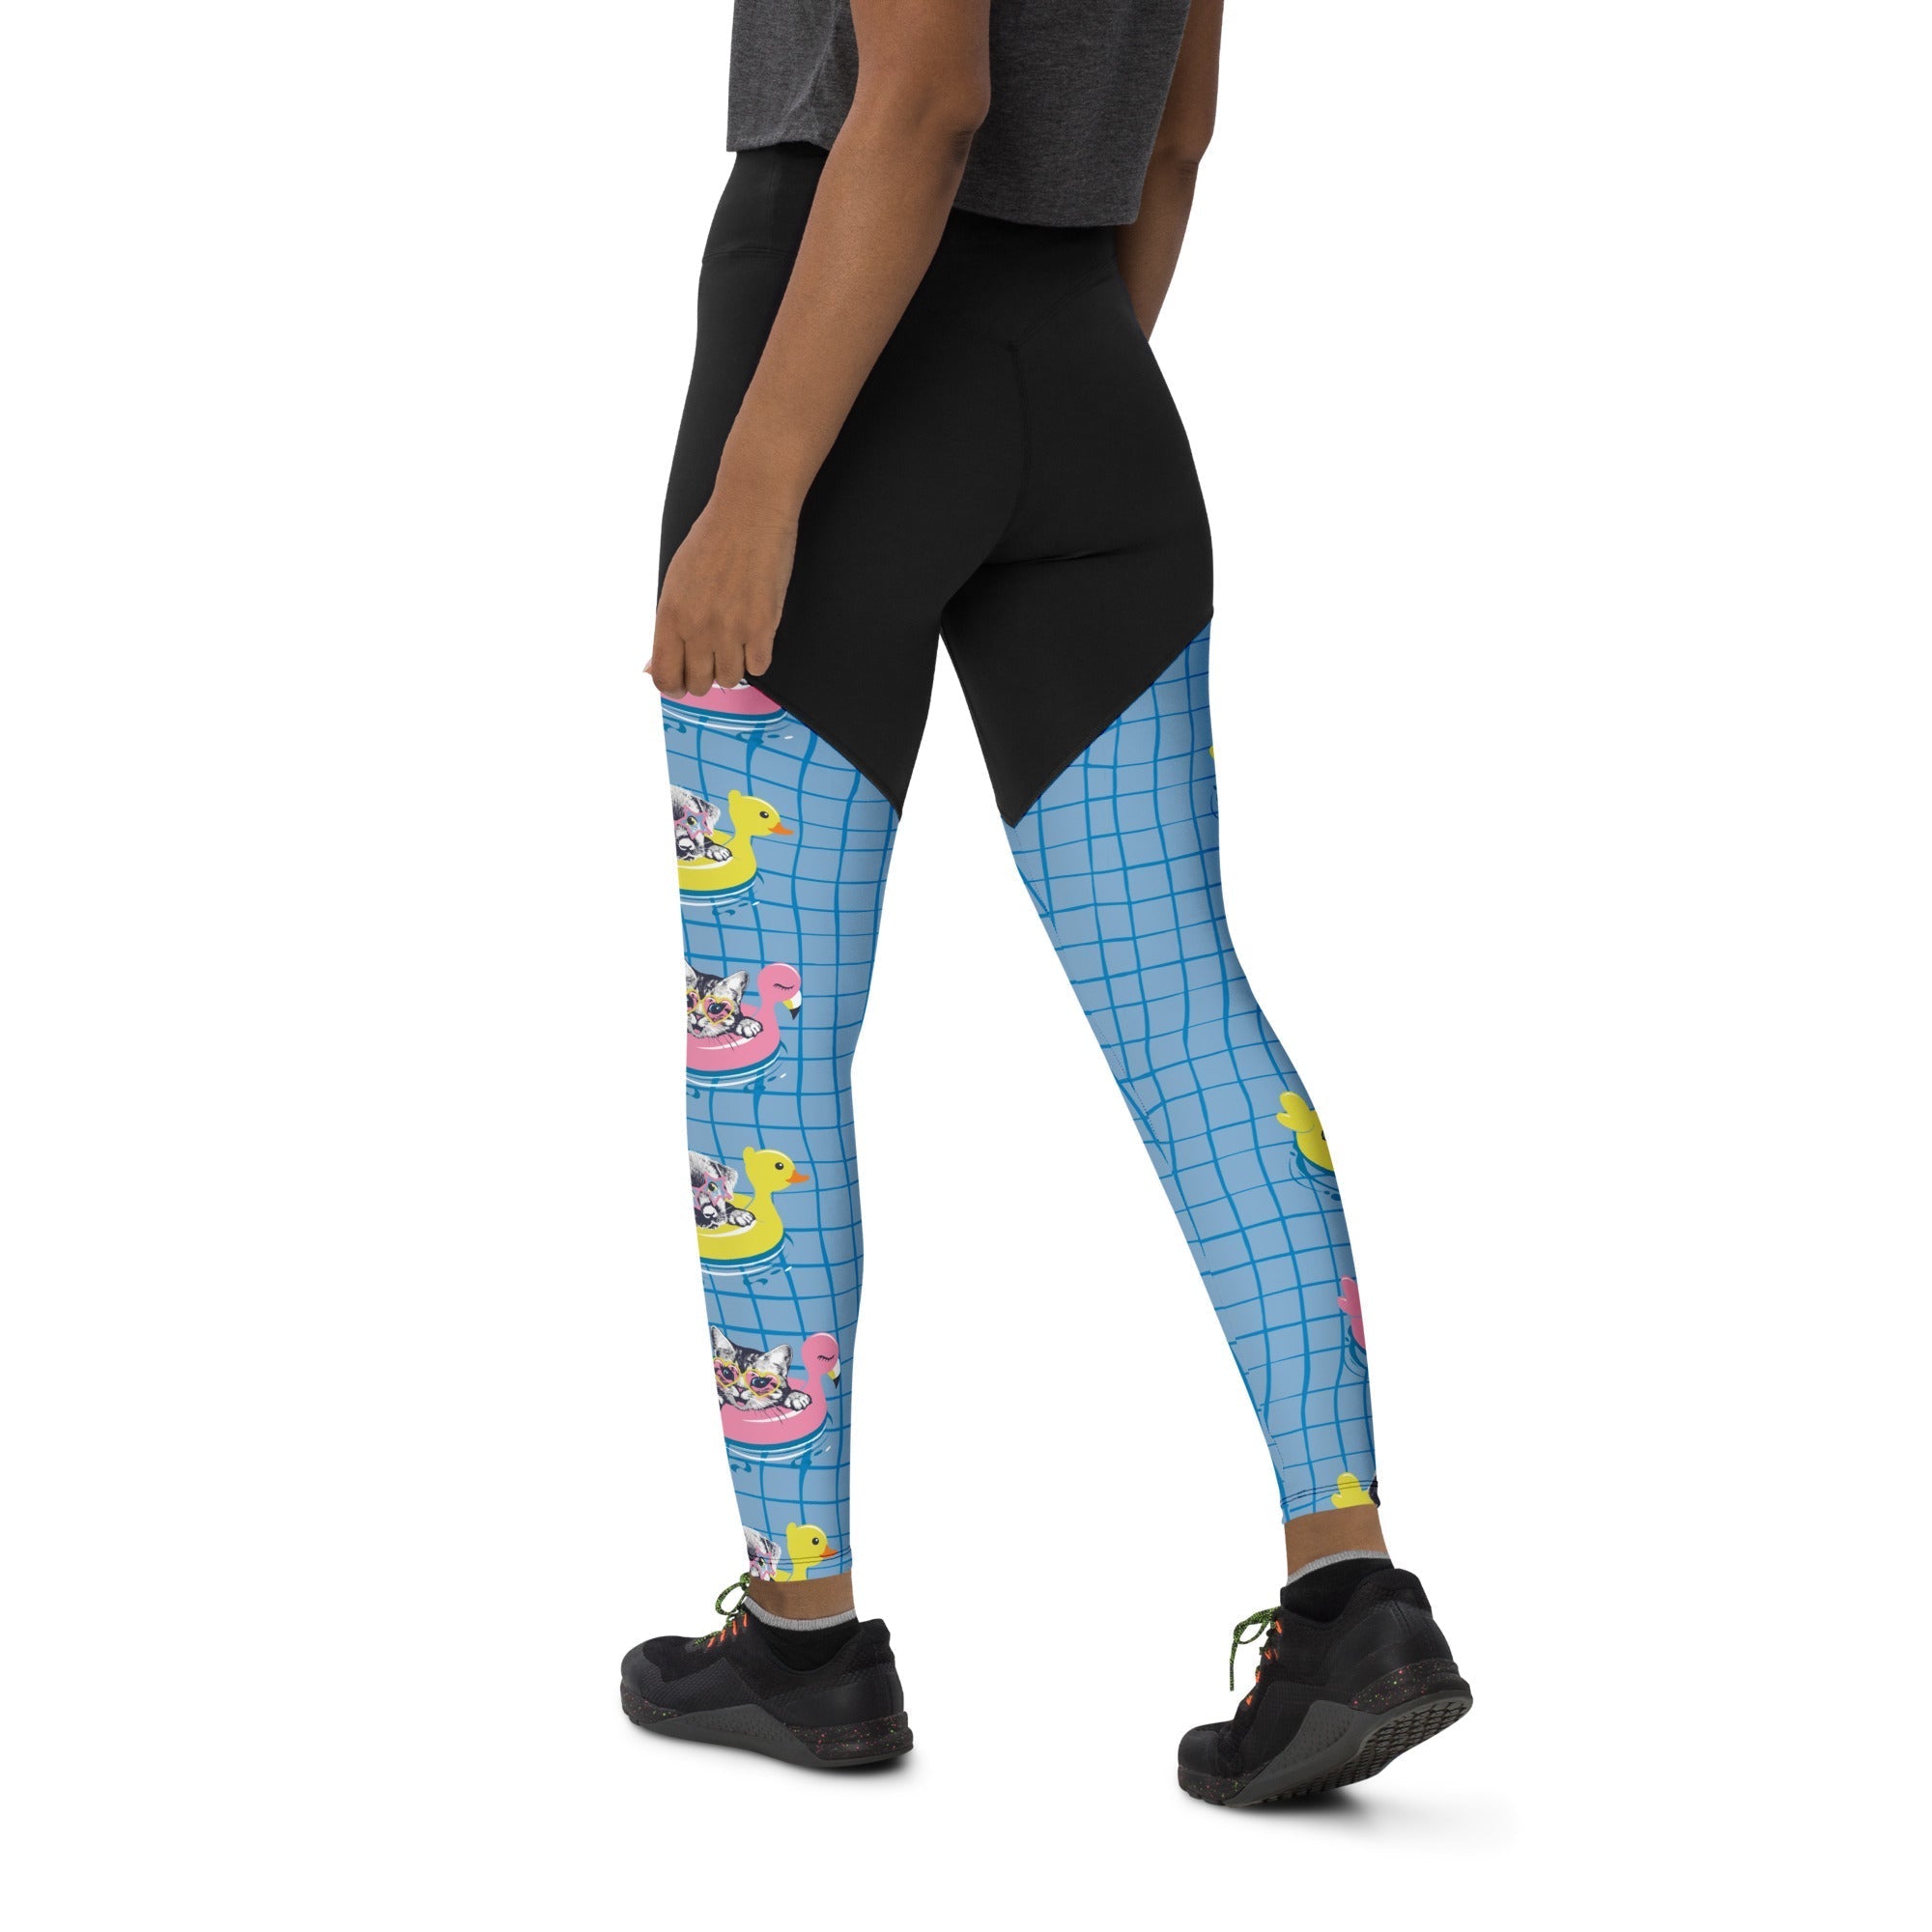 Kittens in Floats Compression Leggings